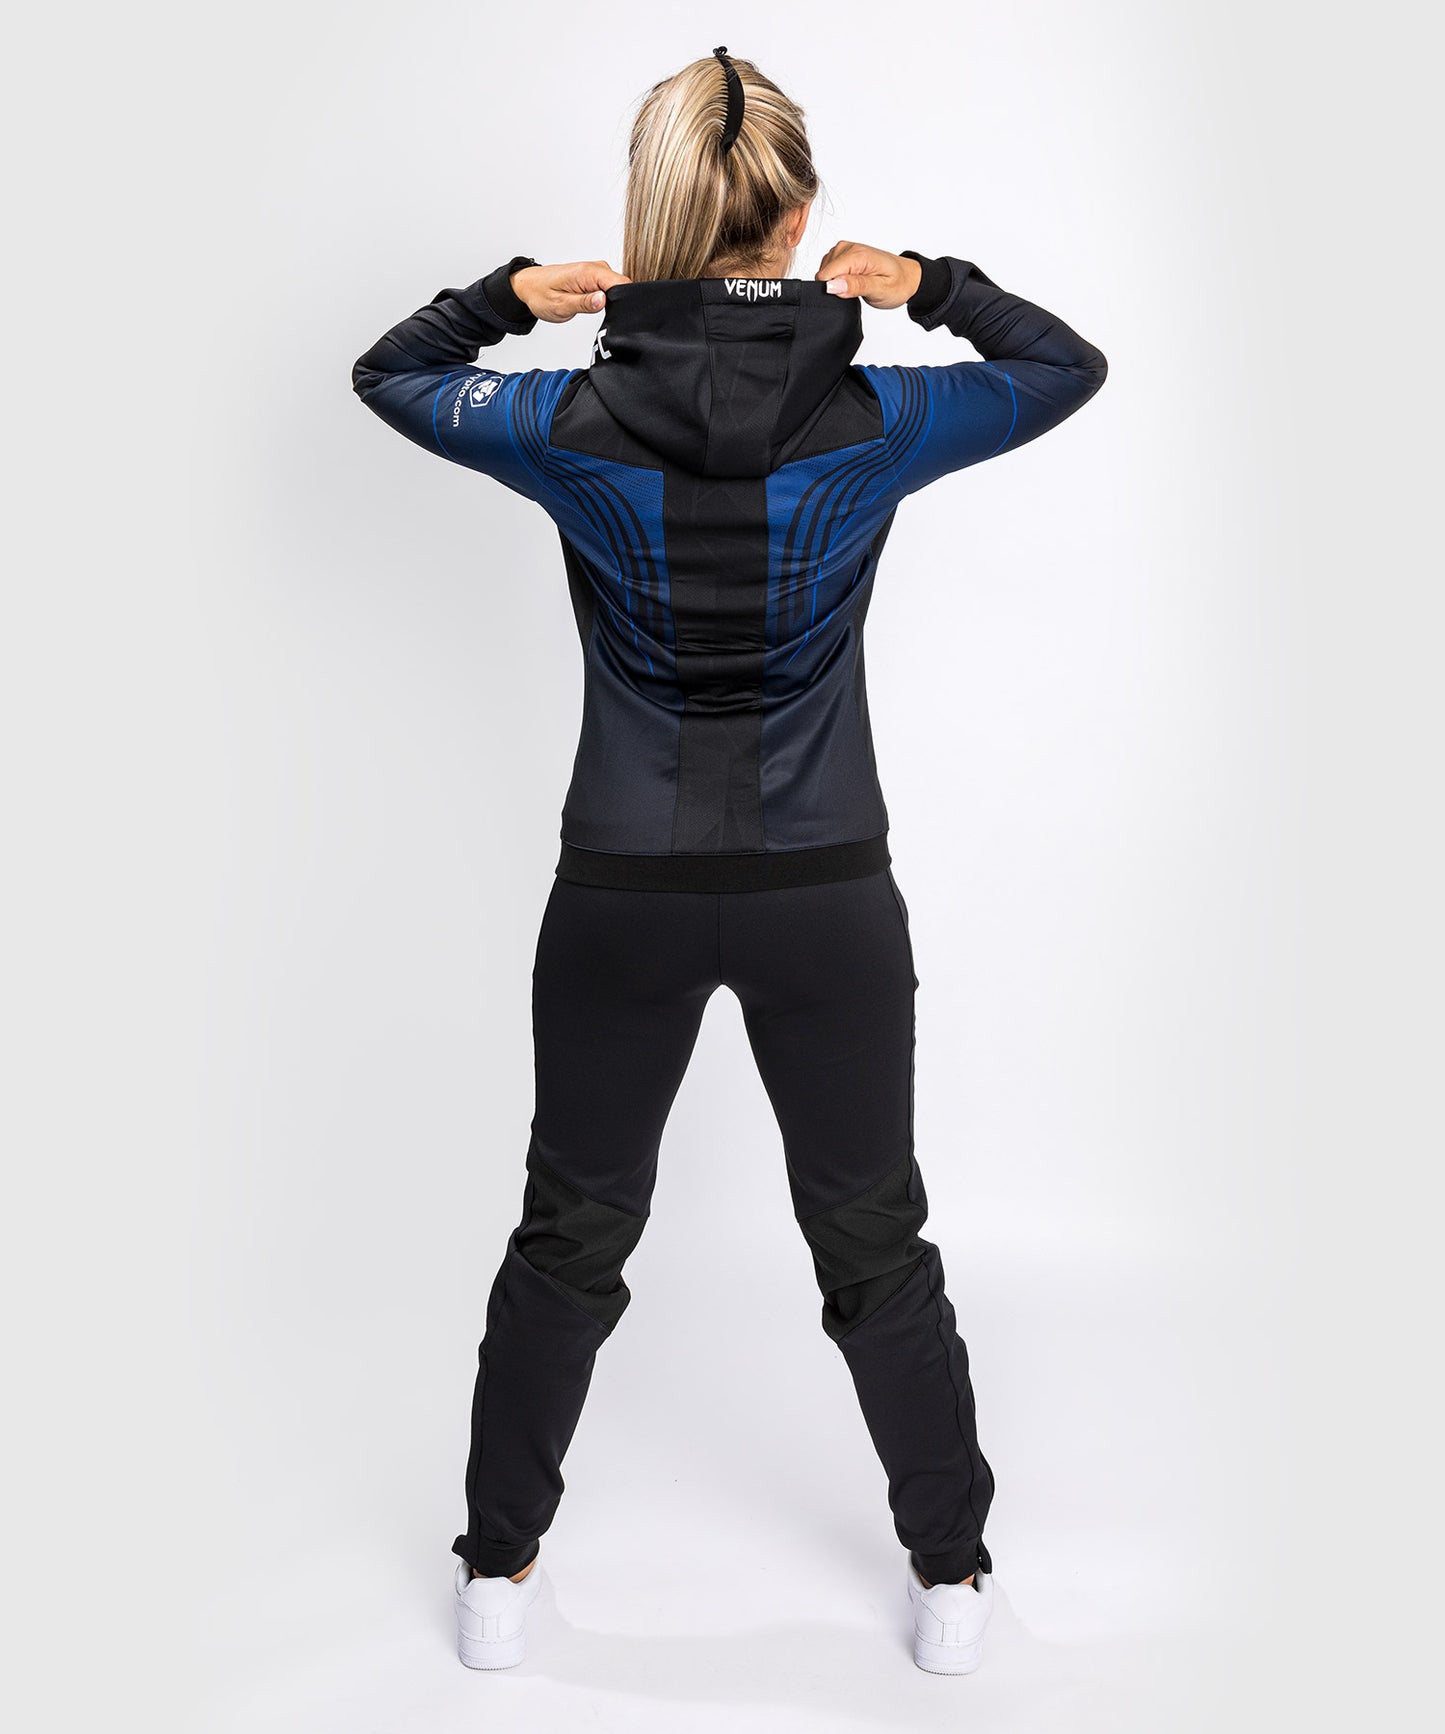 Ufc Authentic Fight Night 2.0 Kit By Venum Women's Walkout Hoodie - Midnight Edition